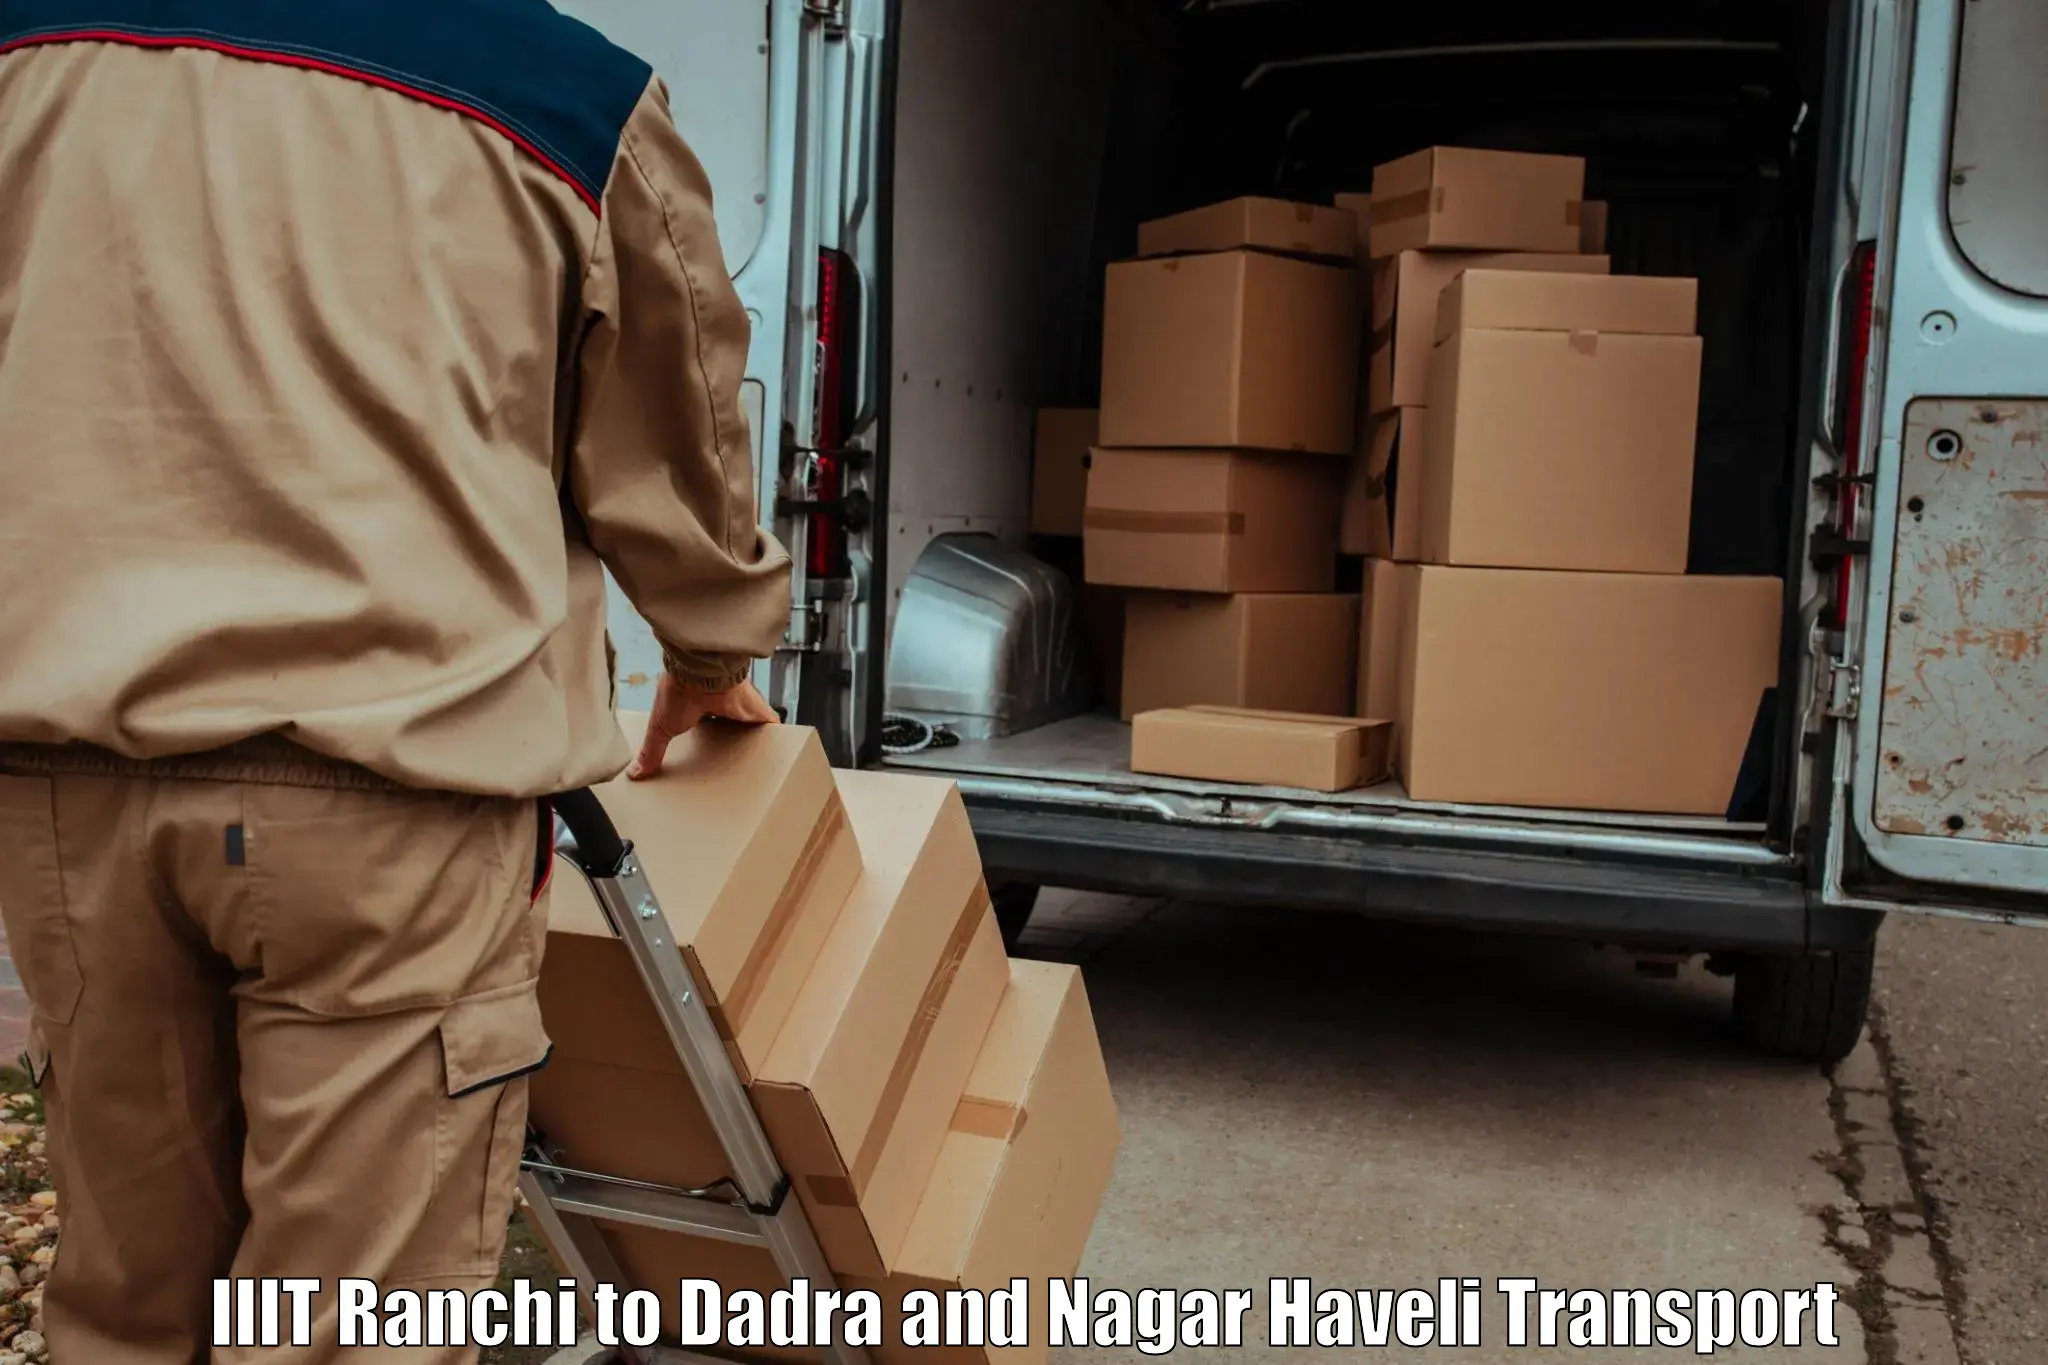 Container transportation services IIIT Ranchi to Dadra and Nagar Haveli